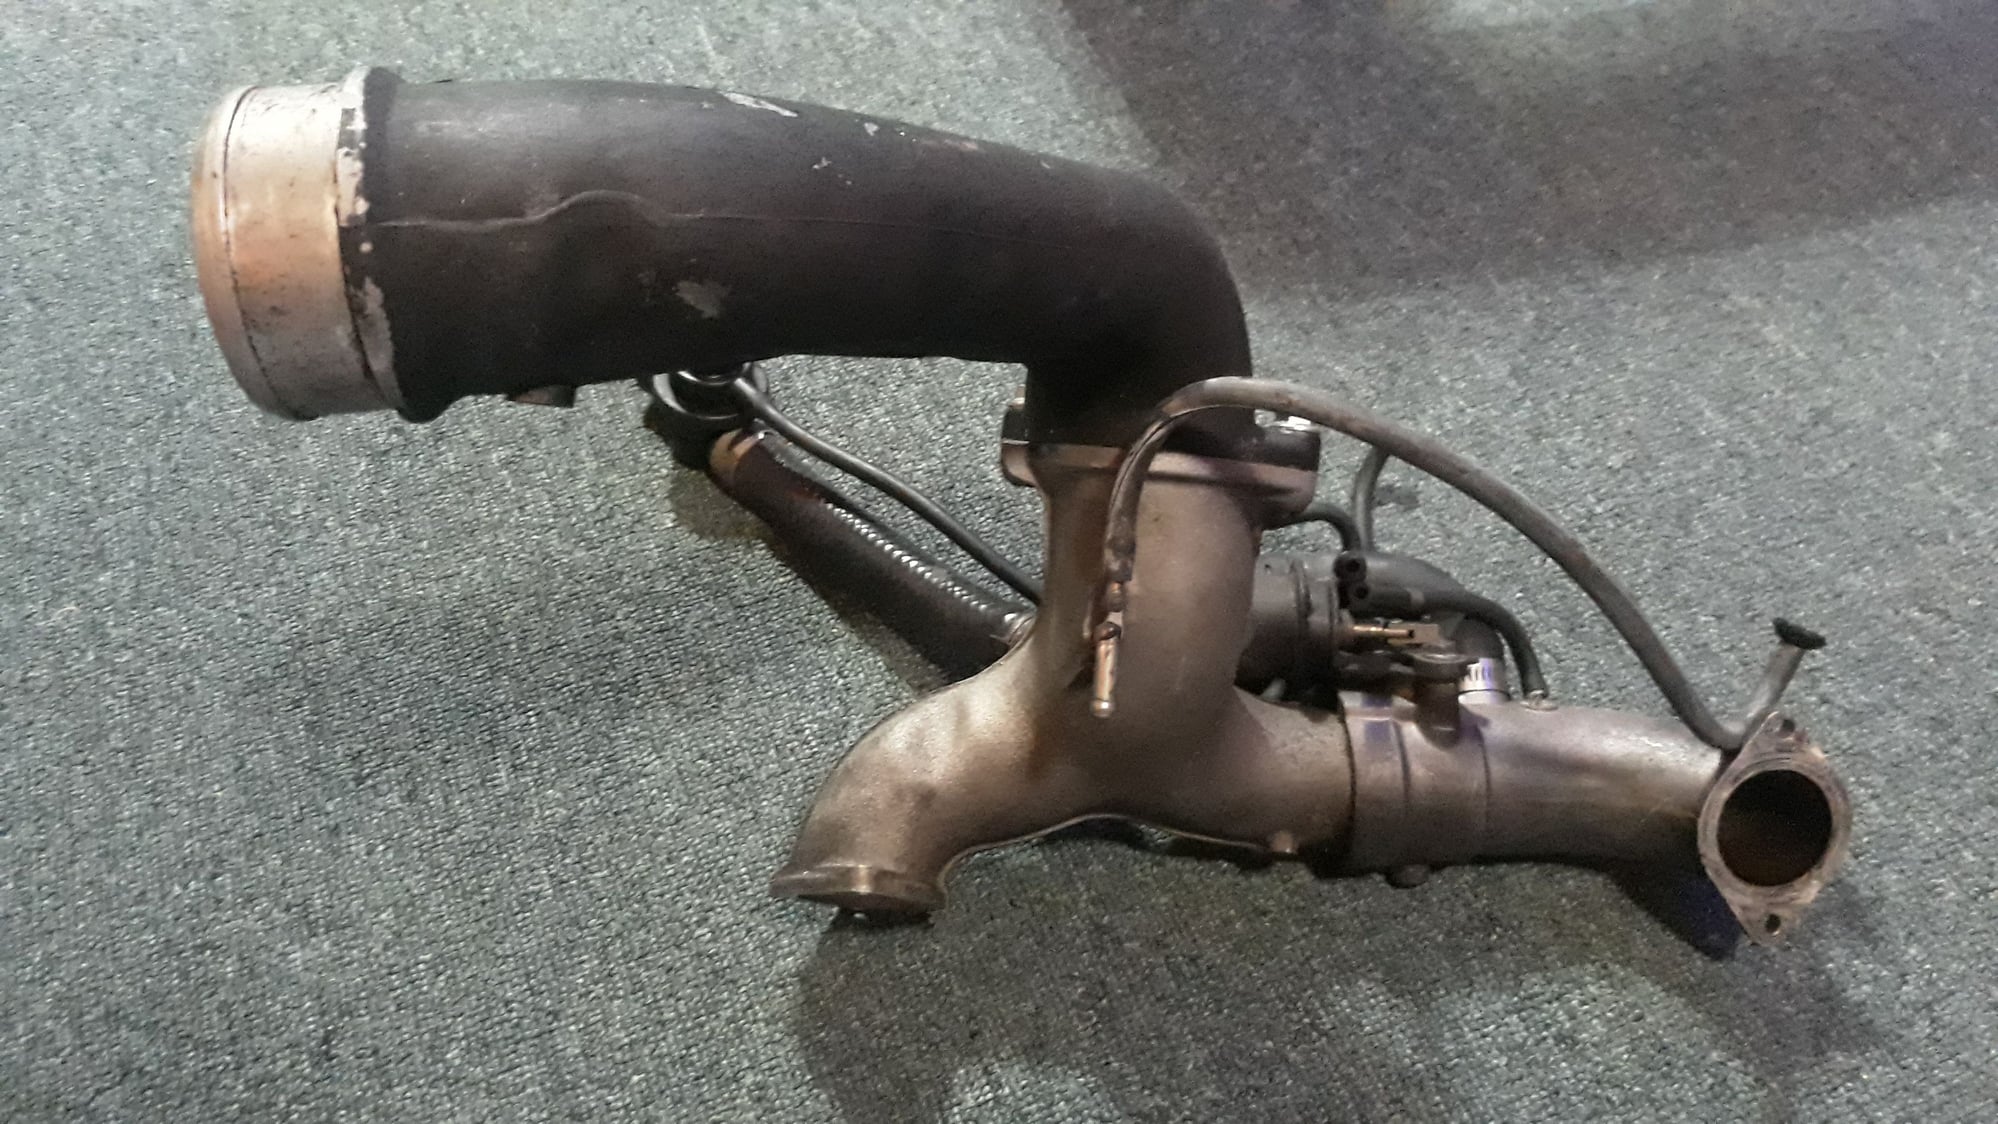 Engine - Intake/Fuel - OEM Y Pipe with OEm blow off valves and more - Used - 1993 to 2001 Mazda RX-7 - Orlando, FL 32824, United States